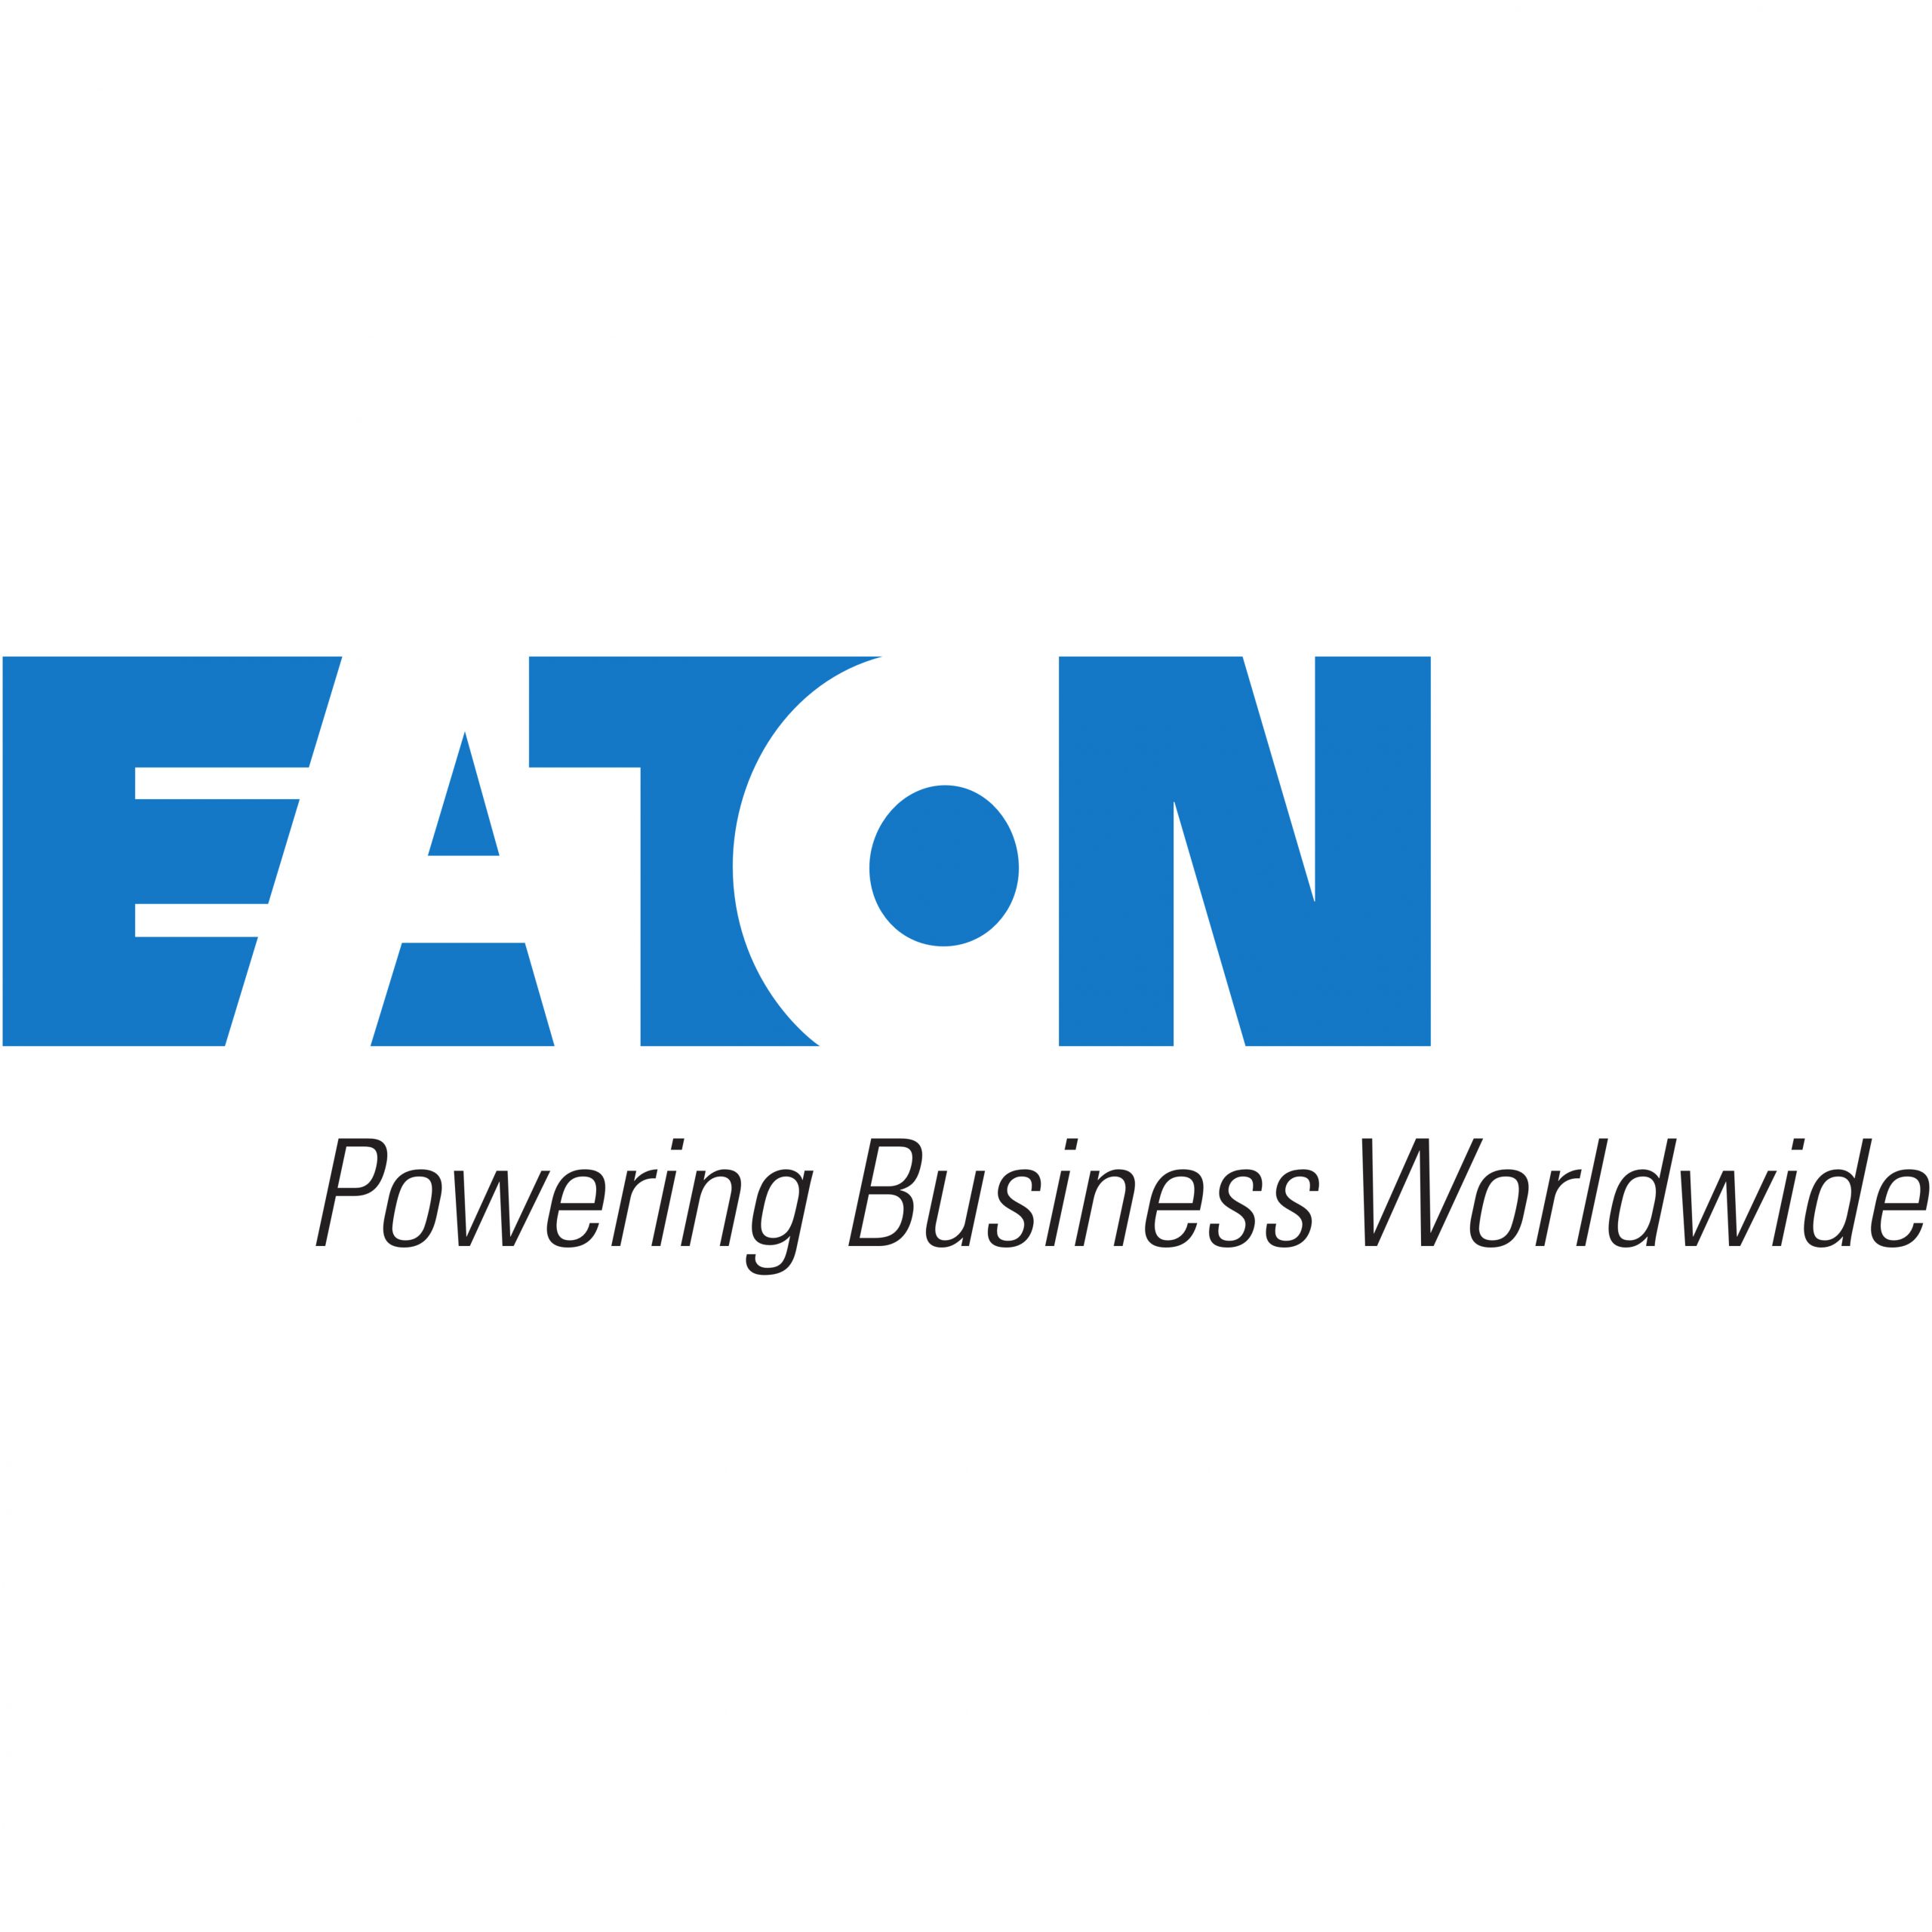 Eaton 5PX G2 UPS 3000VA 3000W 120V Network Card Included 3U Rack/Tower UPS3U Rack-mountable6 Minute Stand-by120 V AC Input6 x… 5PX3000RT3UNG2